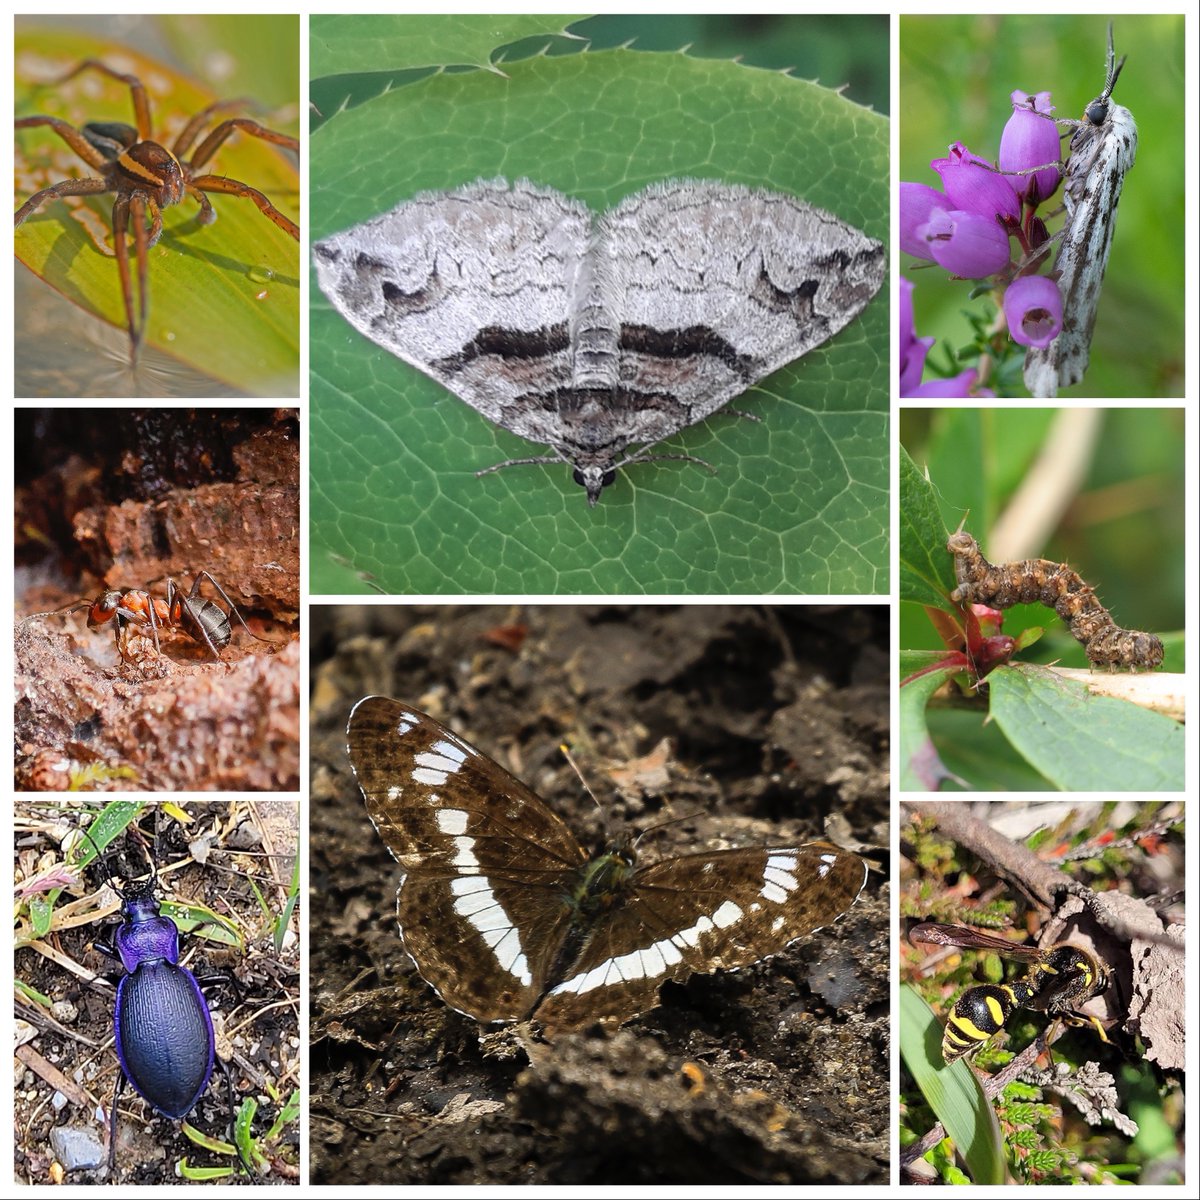 #DorsetForests's woodlands, heathlands & wetlands provide vital habitats to many rare & important species. We hope you've enjoyed a look at some of our smaller inhabitants during #InsectWeek! 🦗🐝🐜

#InsectWeek22 #LittleThingsThatRunTheWorld #LoveInsects #nature #wildlife